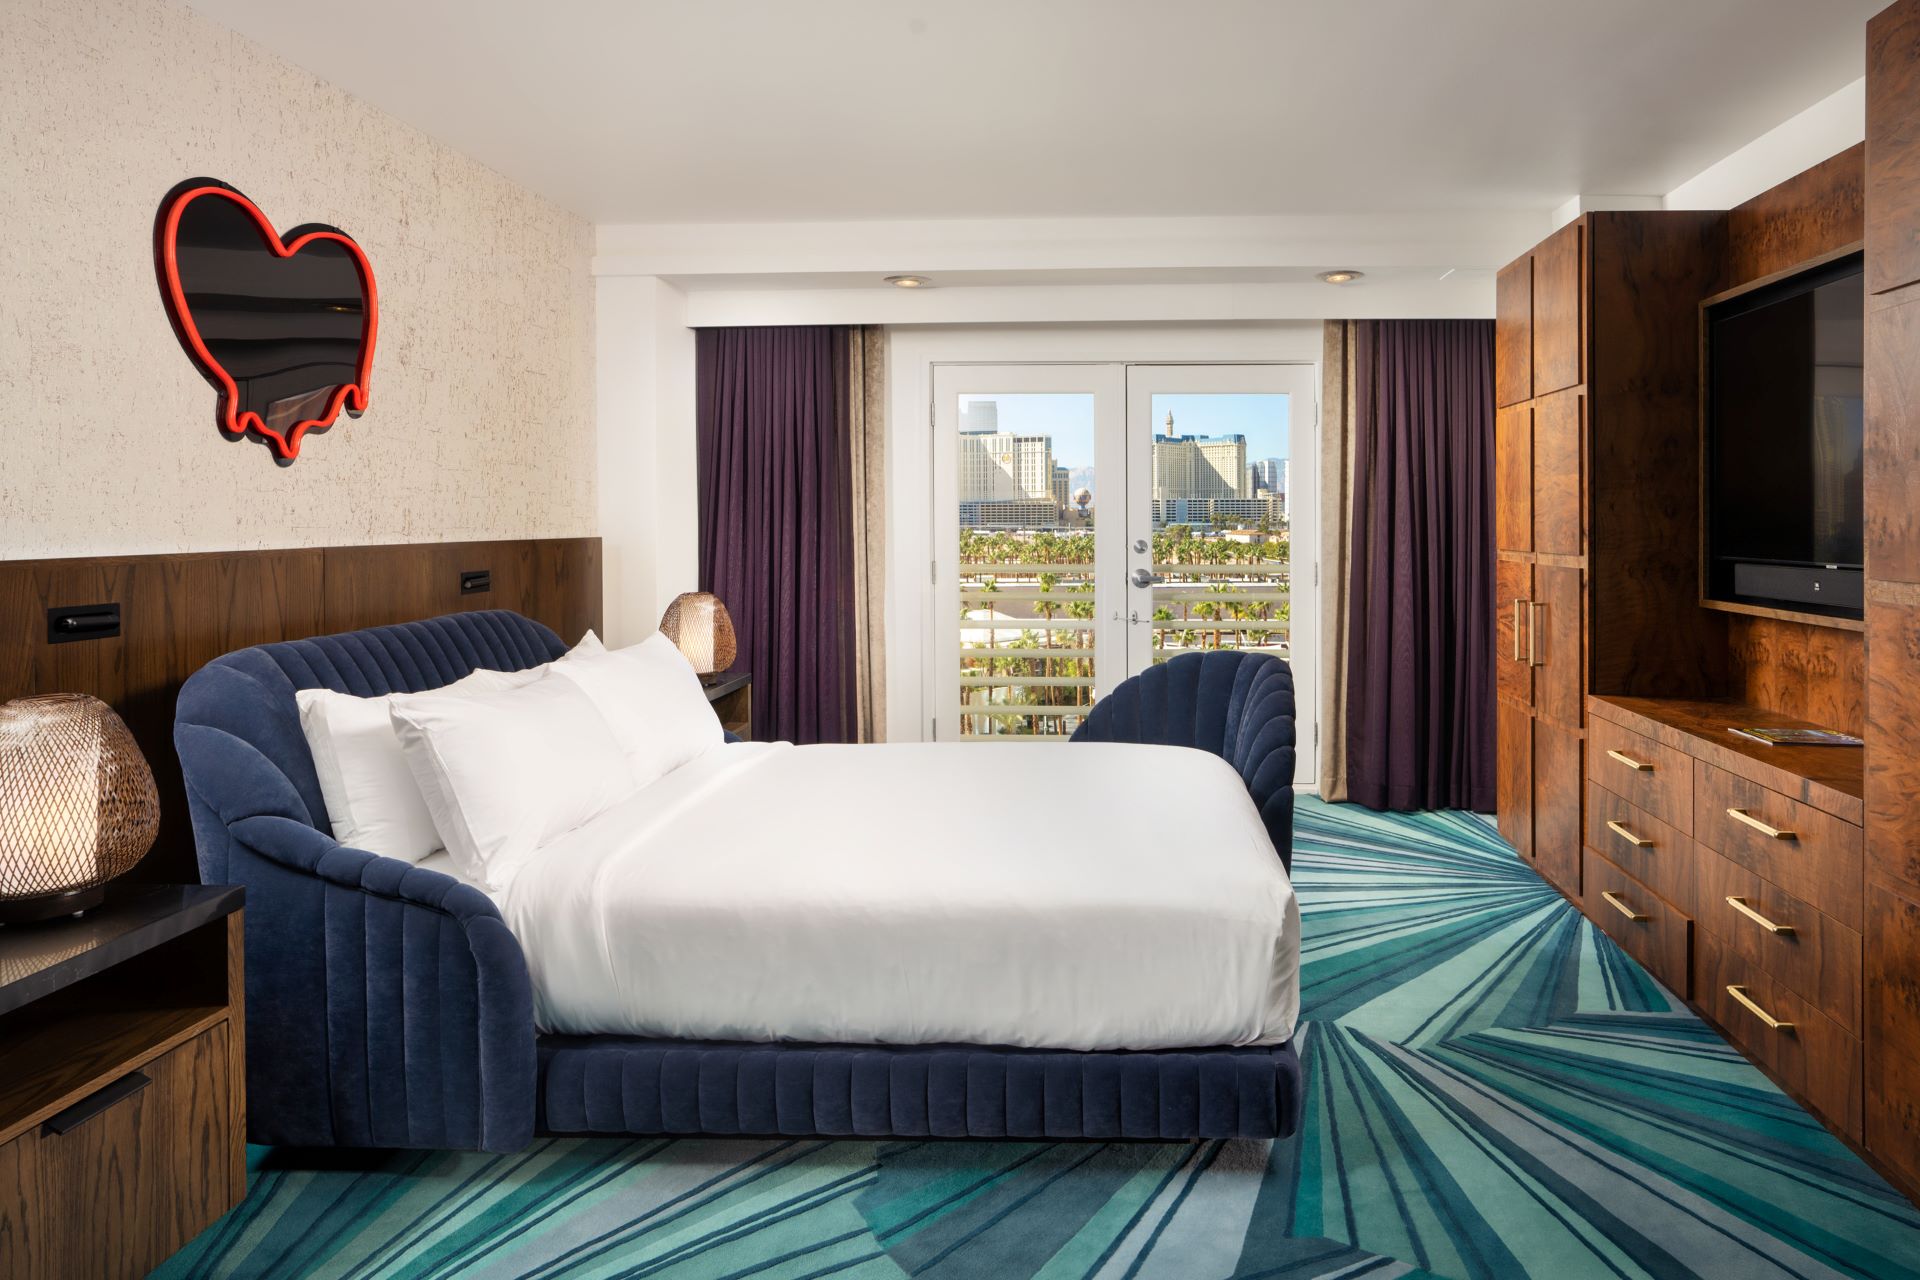 The second bedroom in the Shag Suite at Virgin Hotels Las Vegas. A blue, abstract pattern covers the carpet, a large bed in the cntre of the room with a kitschy neon heart sign above the headboard.